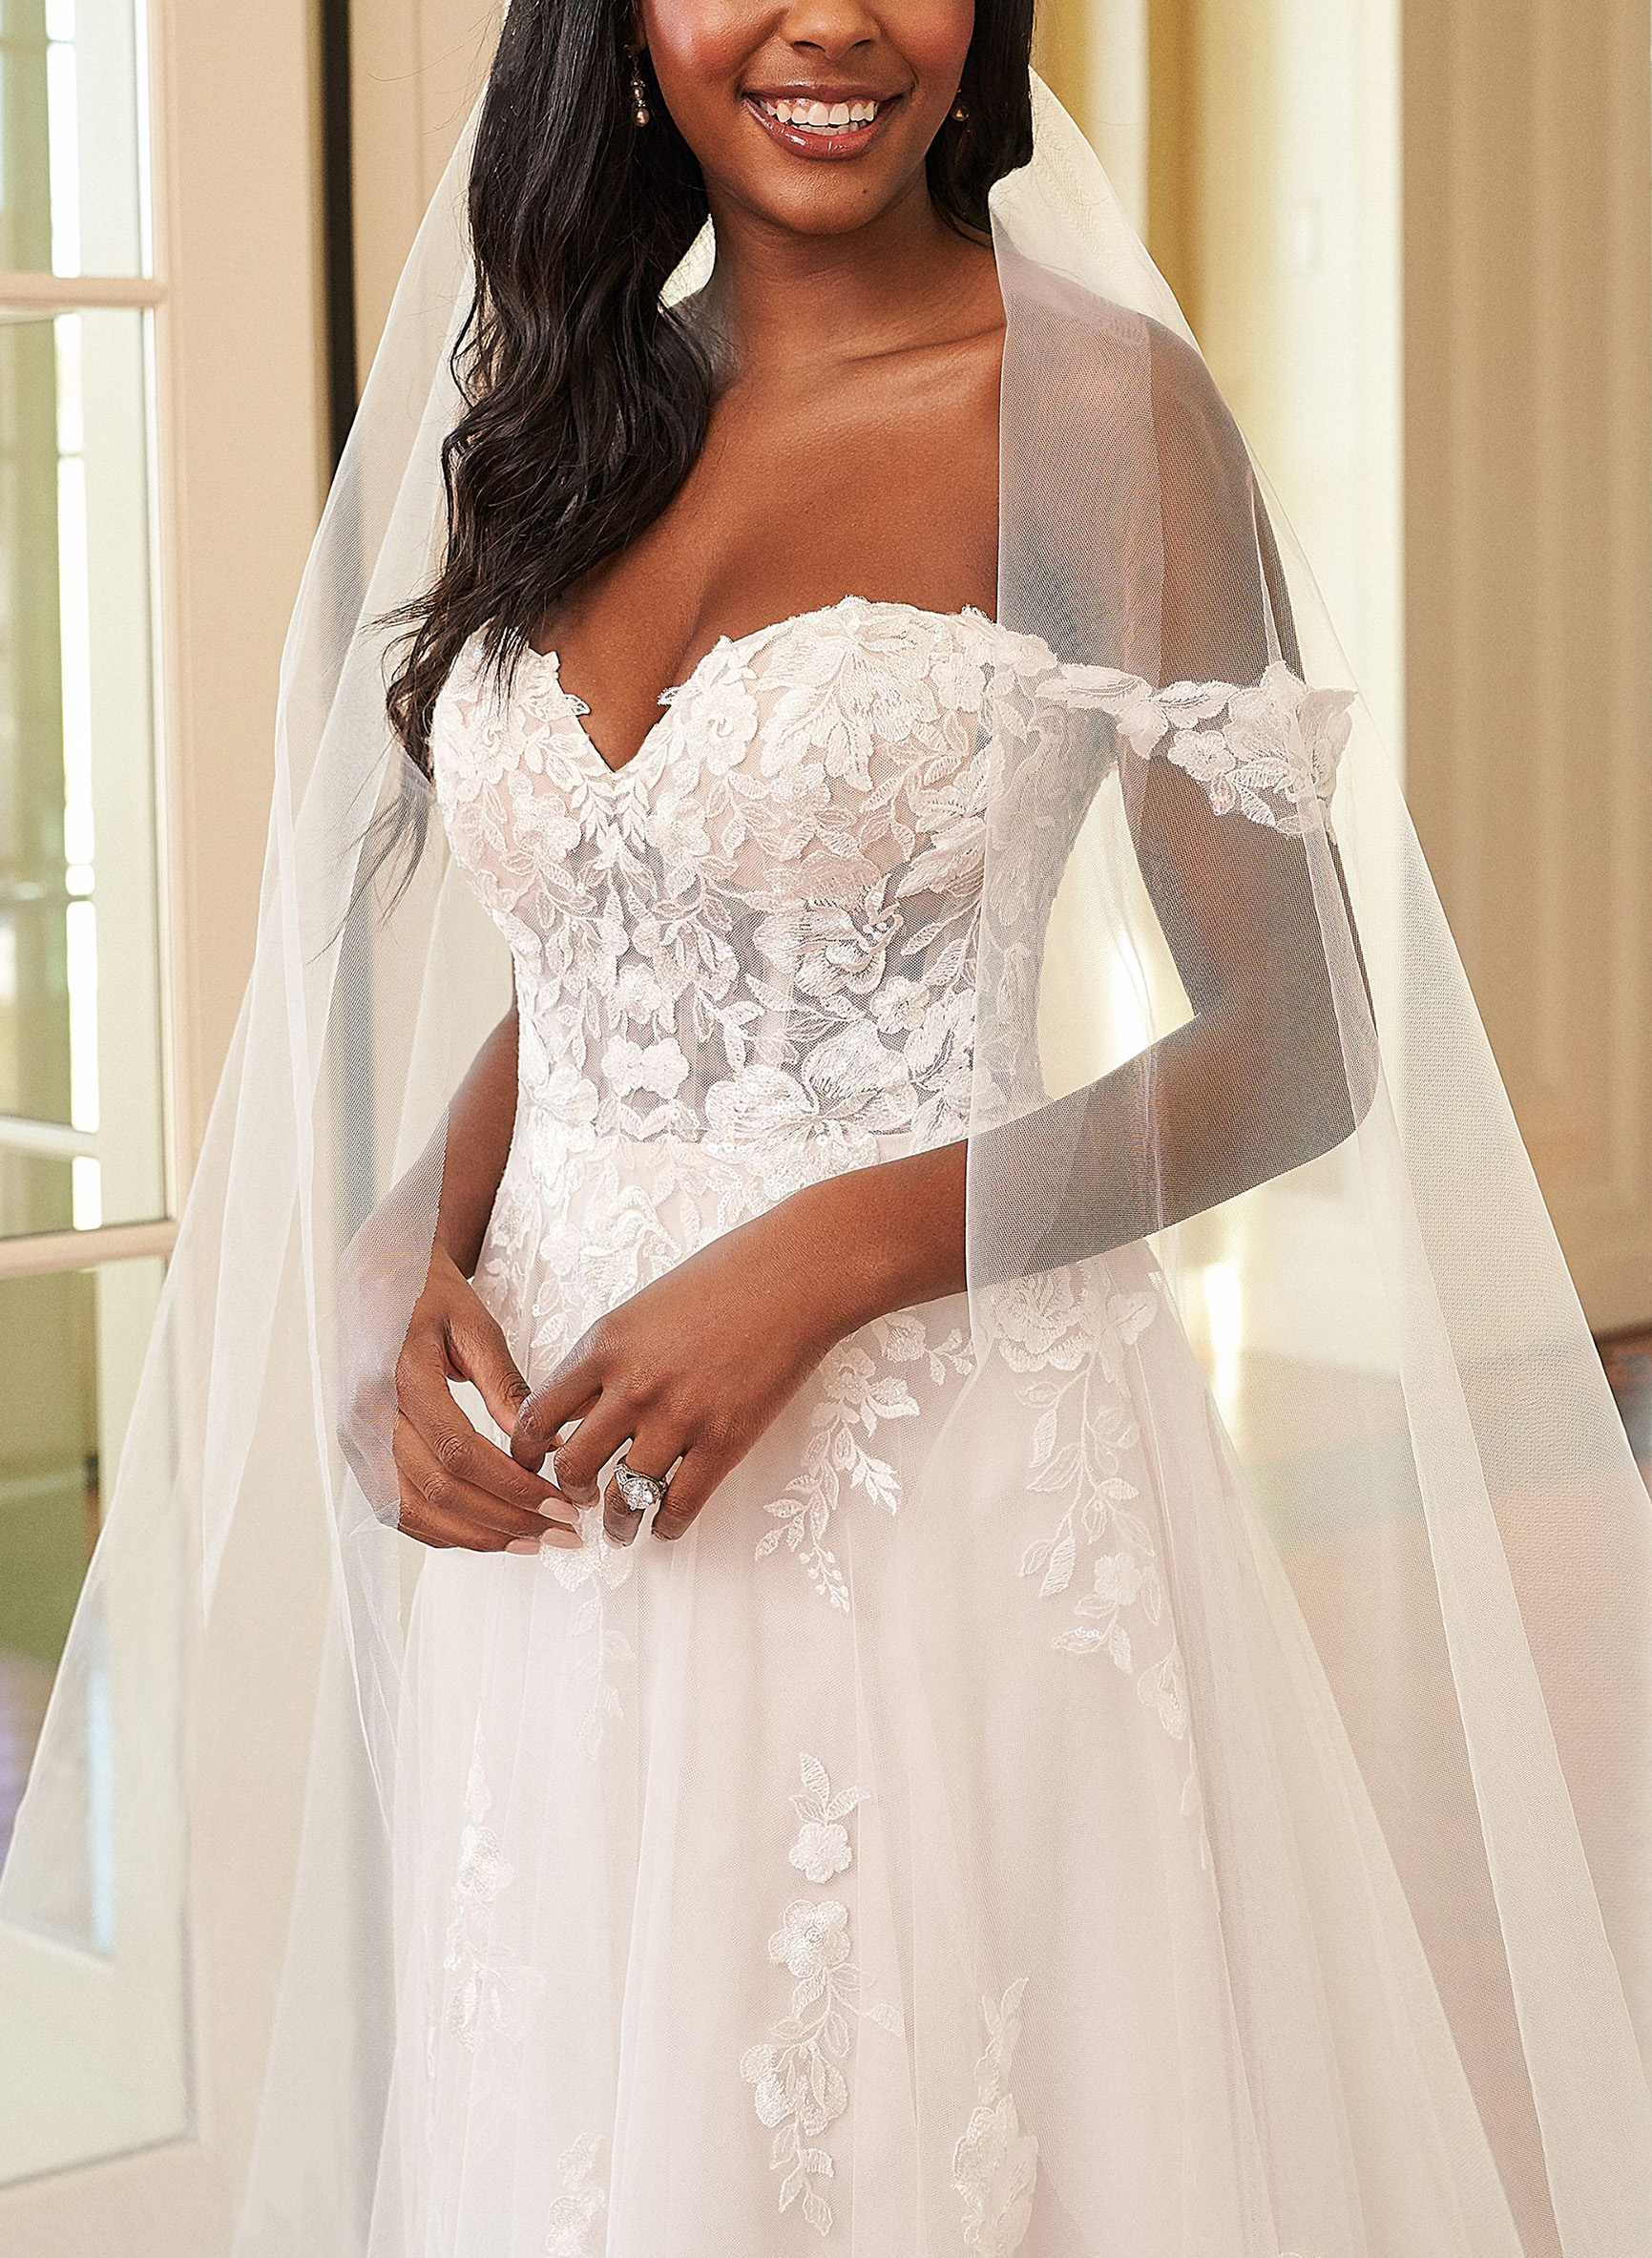 Lace Off-the-Shoulder Romantic Wedding Dresses With